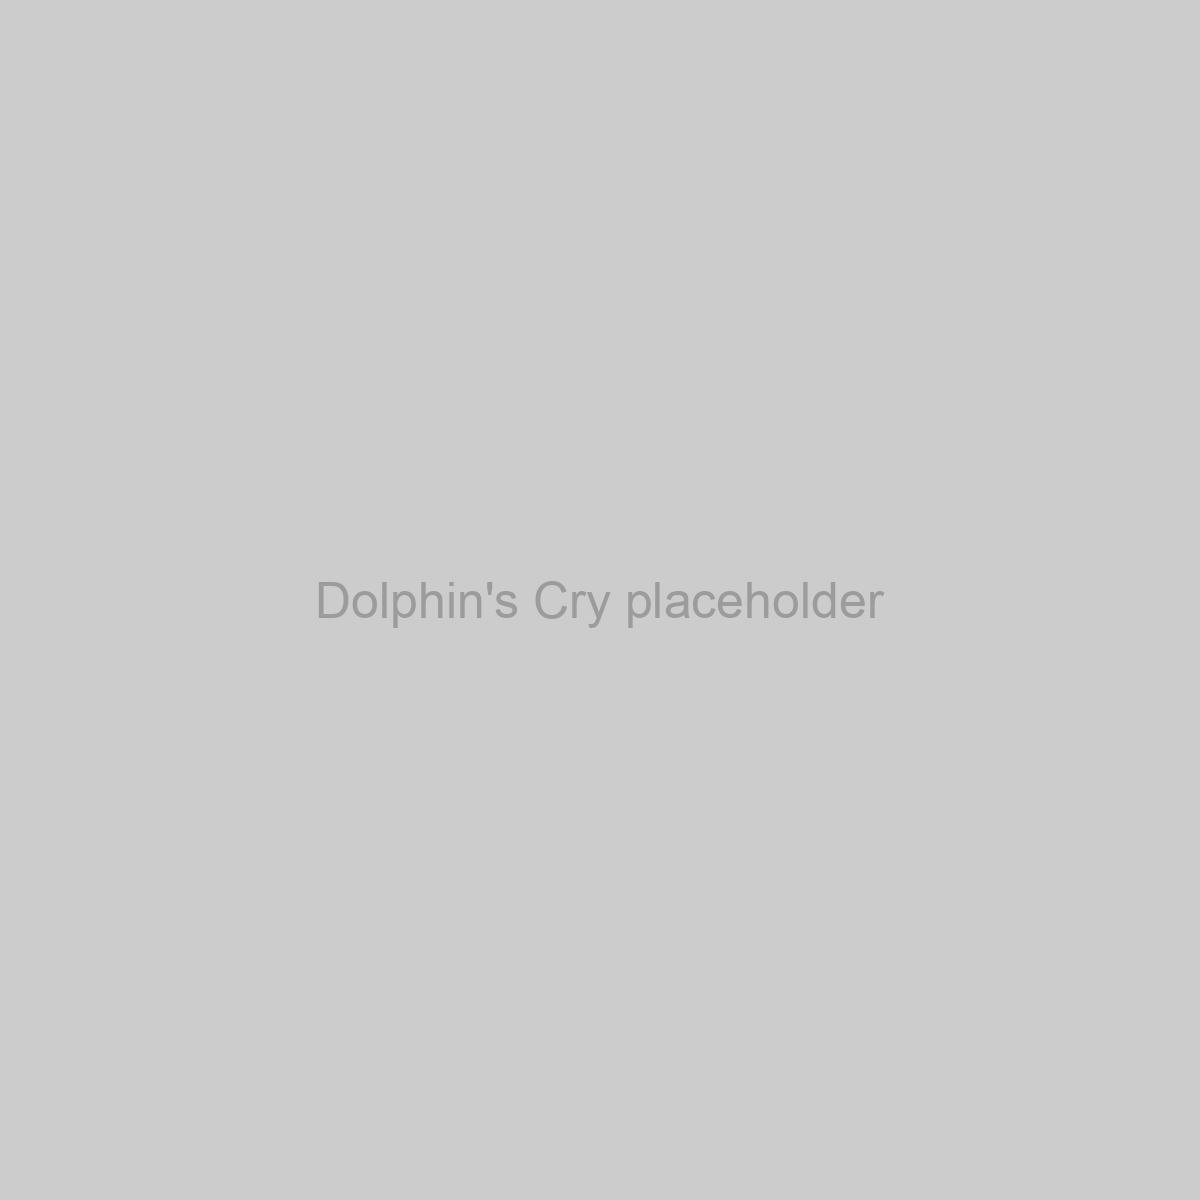 Dolphin's Cry Placeholder Image